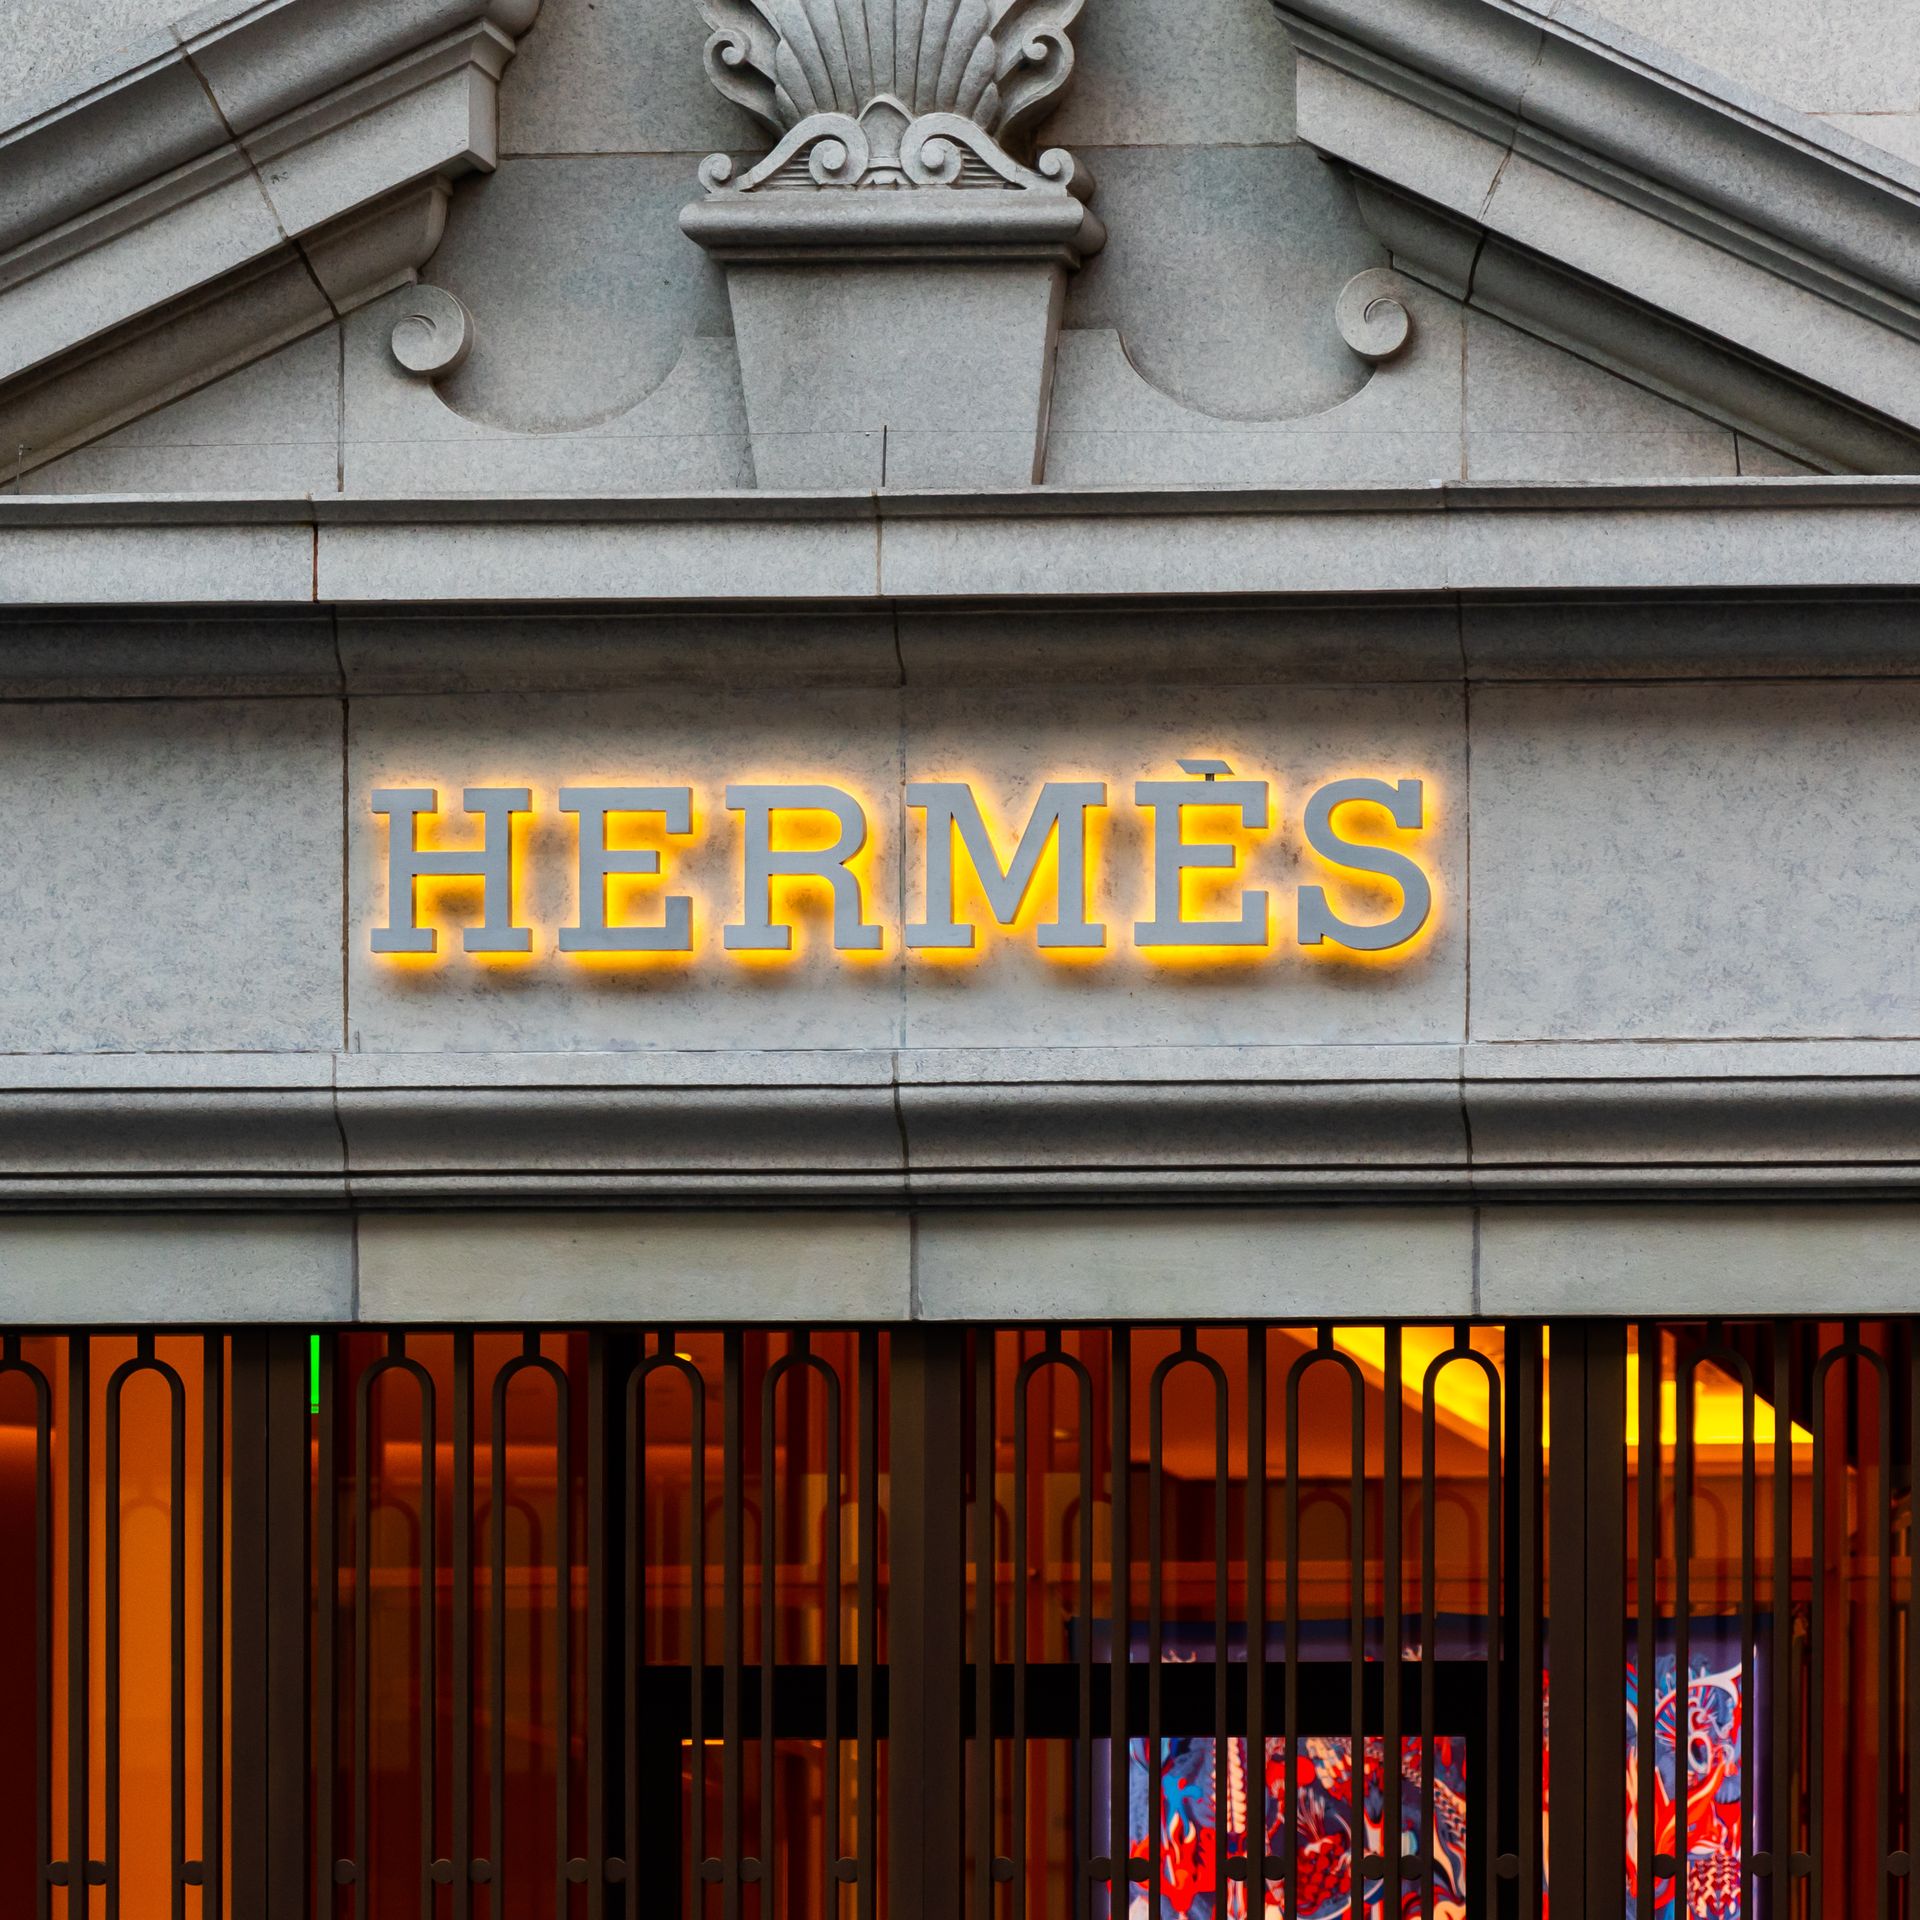 Hermès temporarily closes all stores in Russia after invasion of Ukraine